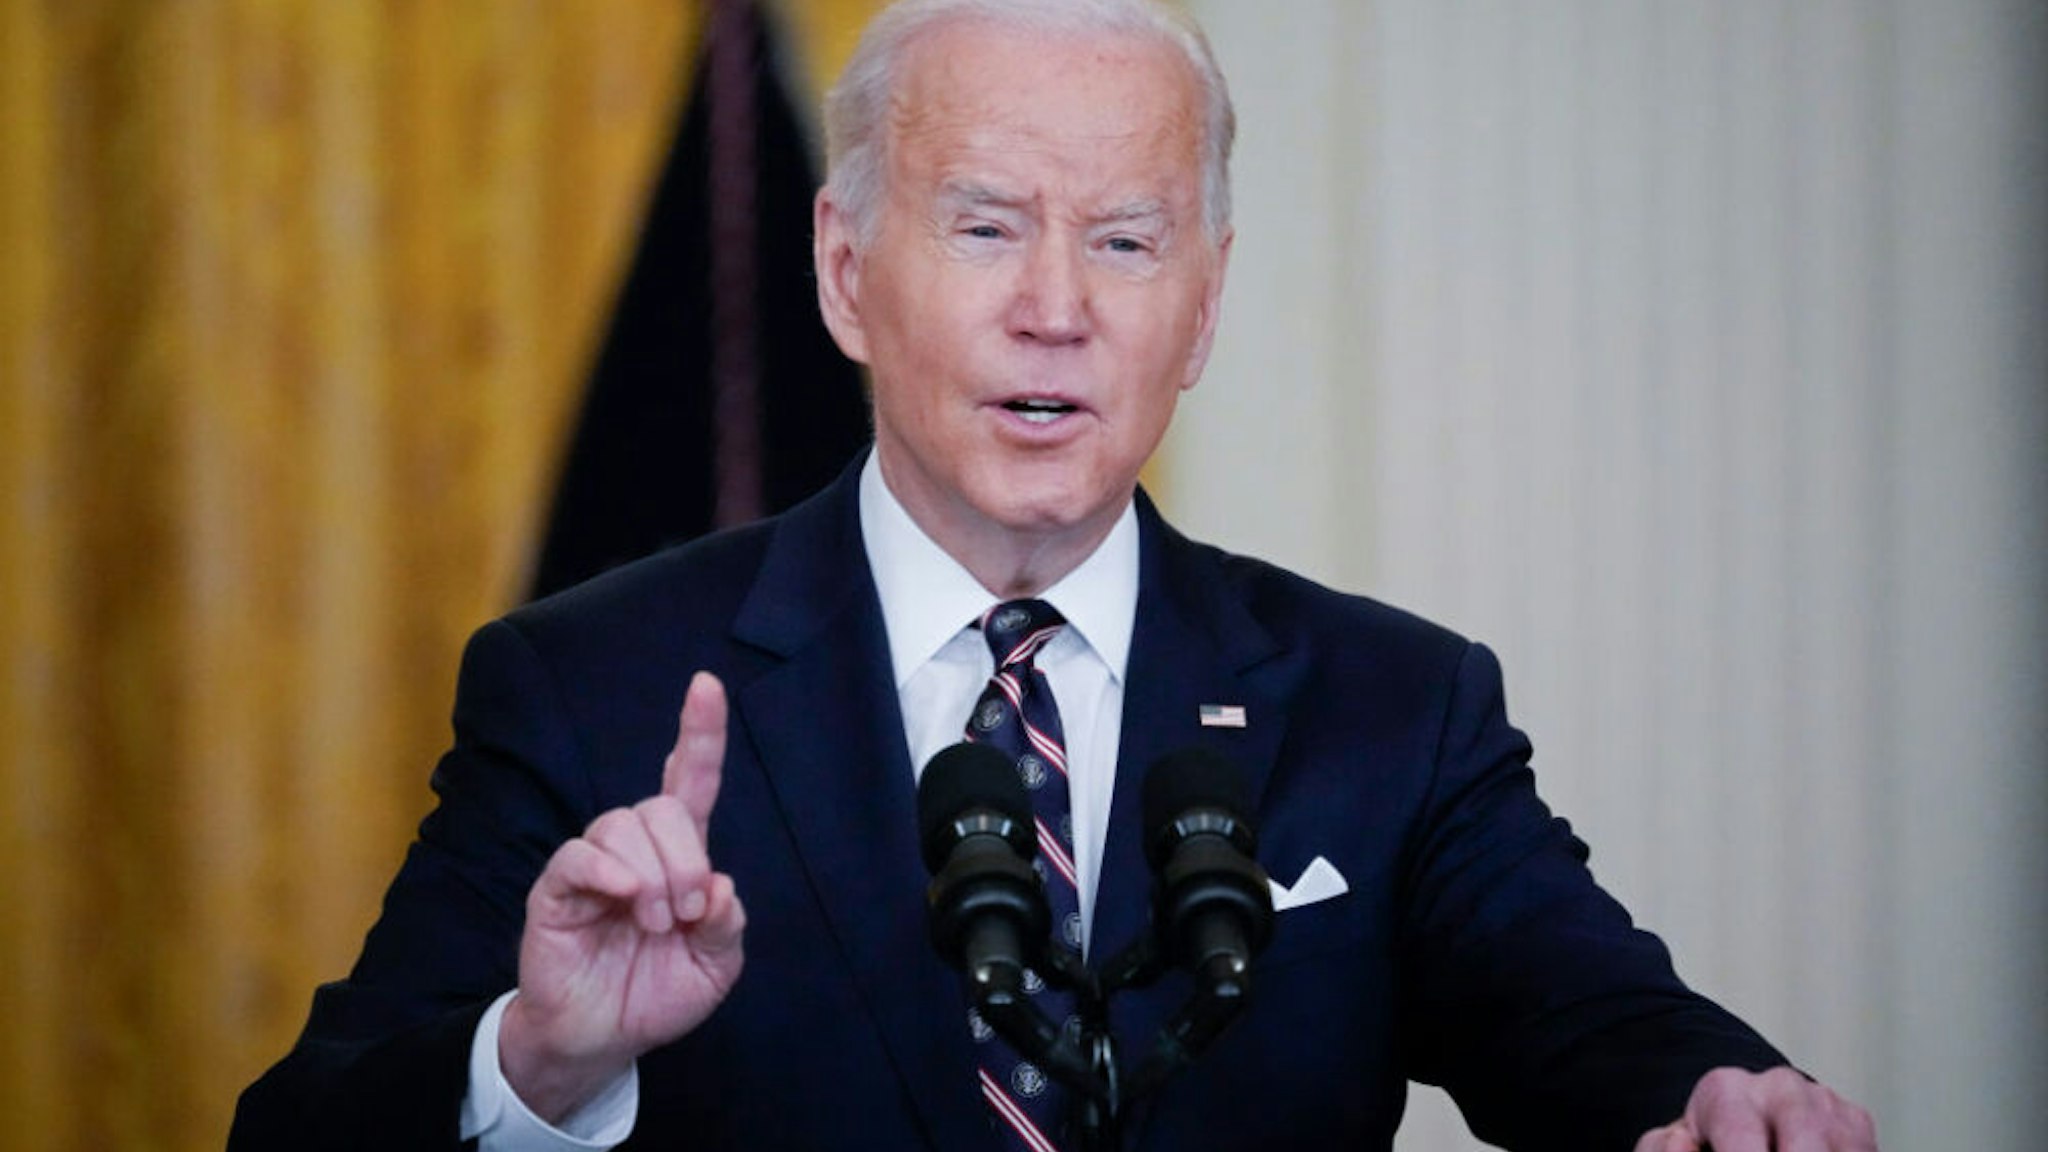 WASHINGTON, DC - FEBRUARY 22: U.S. President Joe Biden speaks on developments in Ukraine and Russia, and announces sanctions against Russia, from the East Room of the White House February 22, 2022 in Washington, DC. The White House earlier in the day called Russia’s deployment of troops into two pro-Russian separatist regions of Ukraine “the beginnings of an invasion.”